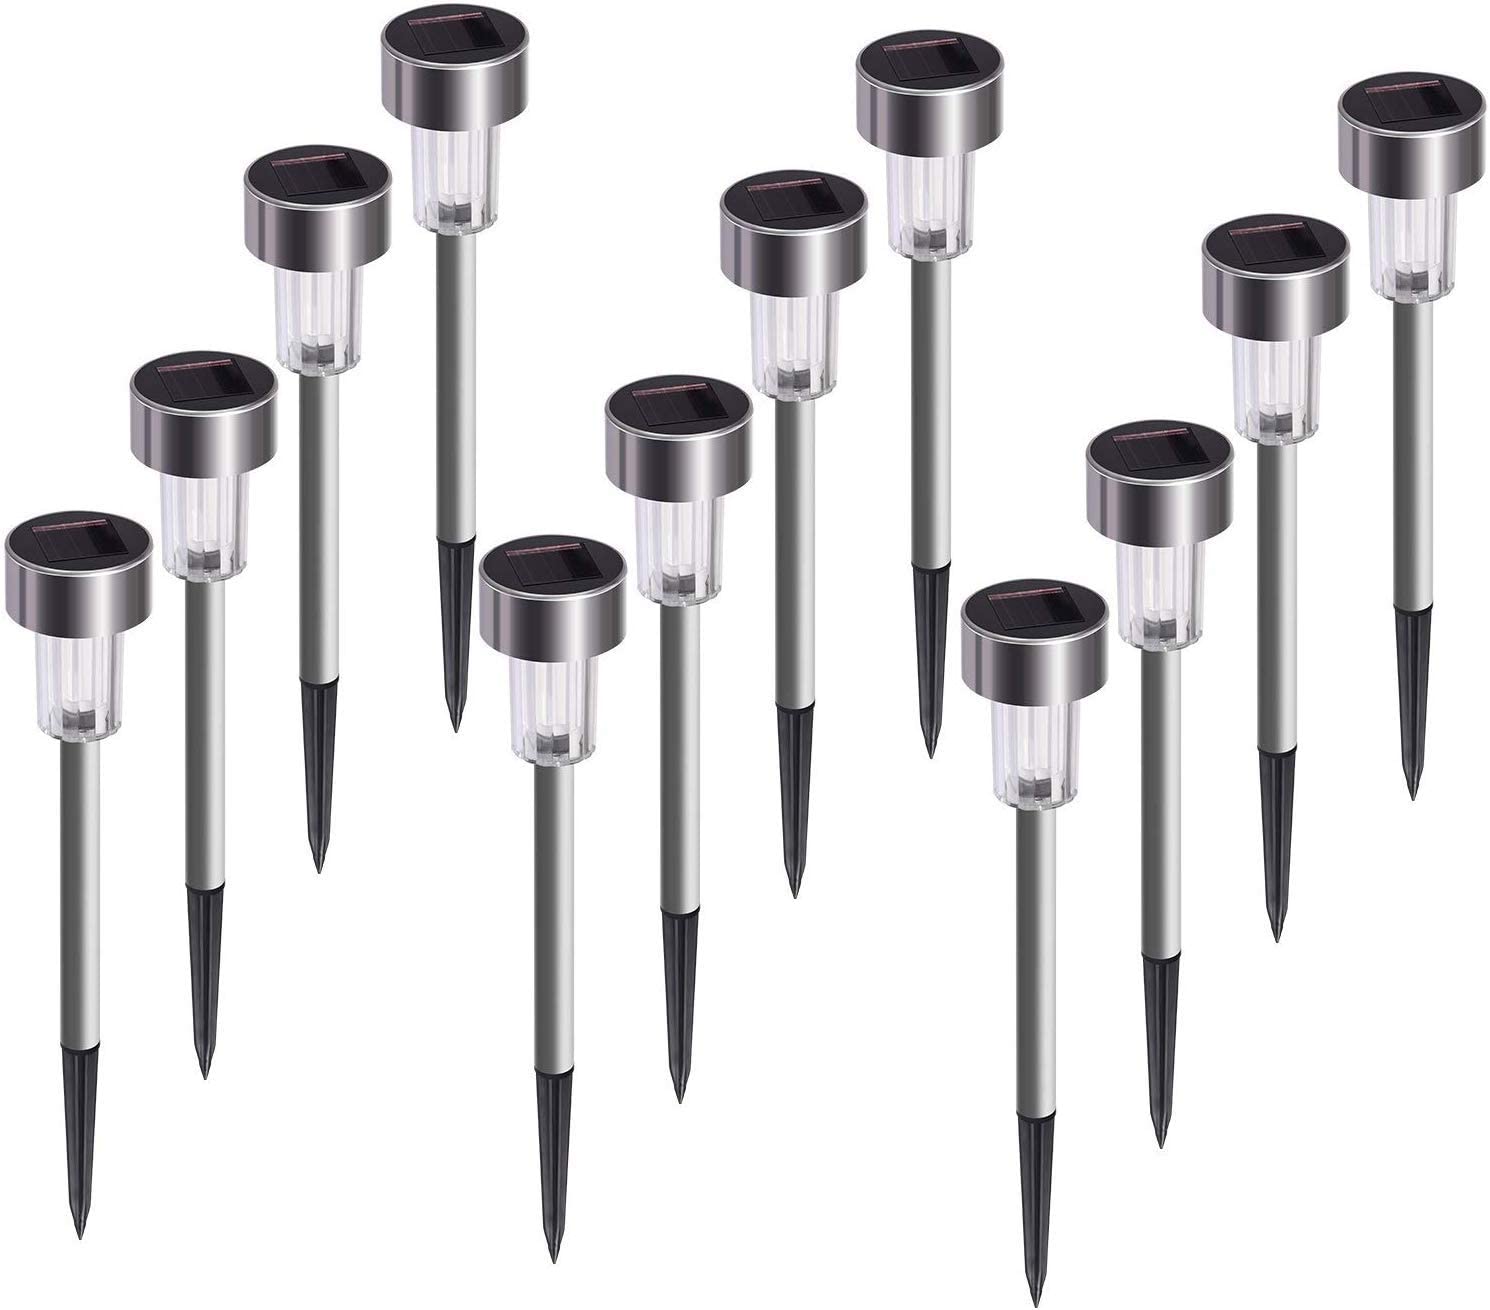 Solar Lights Outdoor, Stainless Steel Outdoor Lights - 12Pack, LED Landscape Lighting Outdoor Solar Lights Solar Powered Lights Solar Garden Lights for Pathway Walkway Driveway Yard & Lawn - image 1 of 8